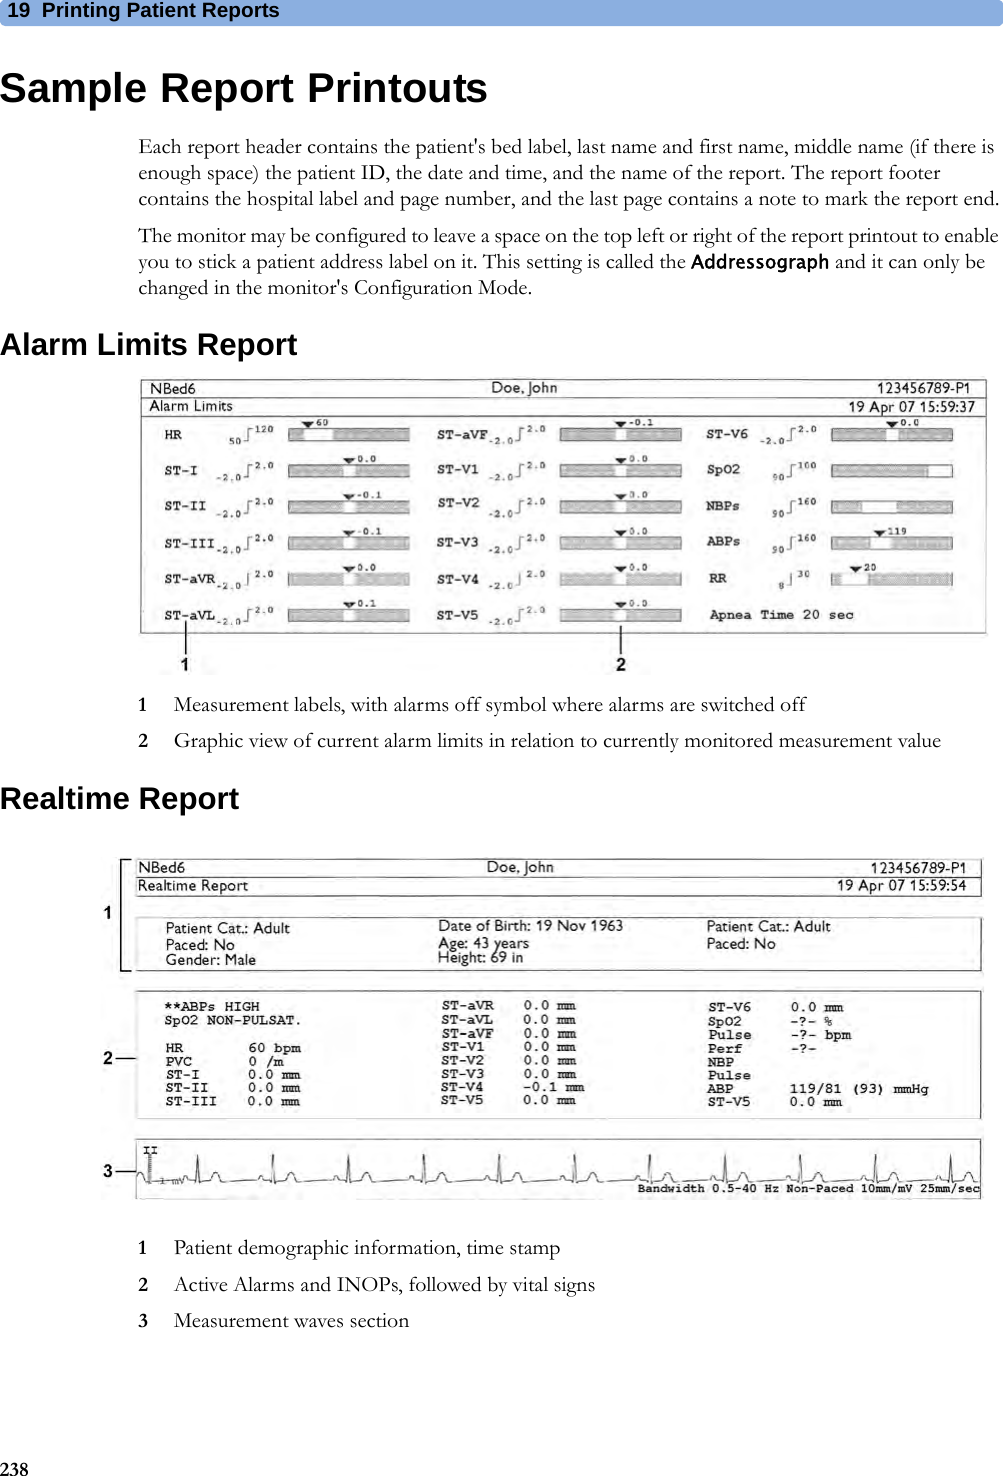 19 Printing Patient Reports238Sample Report PrintoutsEach report header contains the patient&apos;s bed label, last name and first name, middle name (if there is enough space) the patient ID, the date and time, and the name of the report. The report footer contains the hospital label and page number, and the last page contains a note to mark the report end.The monitor may be configured to leave a space on the top left or right of the report printout to enable you to stick a patient address label on it. This setting is called the Addressograph and it can only be changed in the monitor&apos;s Configuration Mode.Alarm Limits Report1Measurement labels, with alarms off symbol where alarms are switched off2Graphic view of current alarm limits in relation to currently monitored measurement valueRealtime Report1Patient demographic information, time stamp2Active Alarms and INOPs, followed by vital signs3Measurement waves section